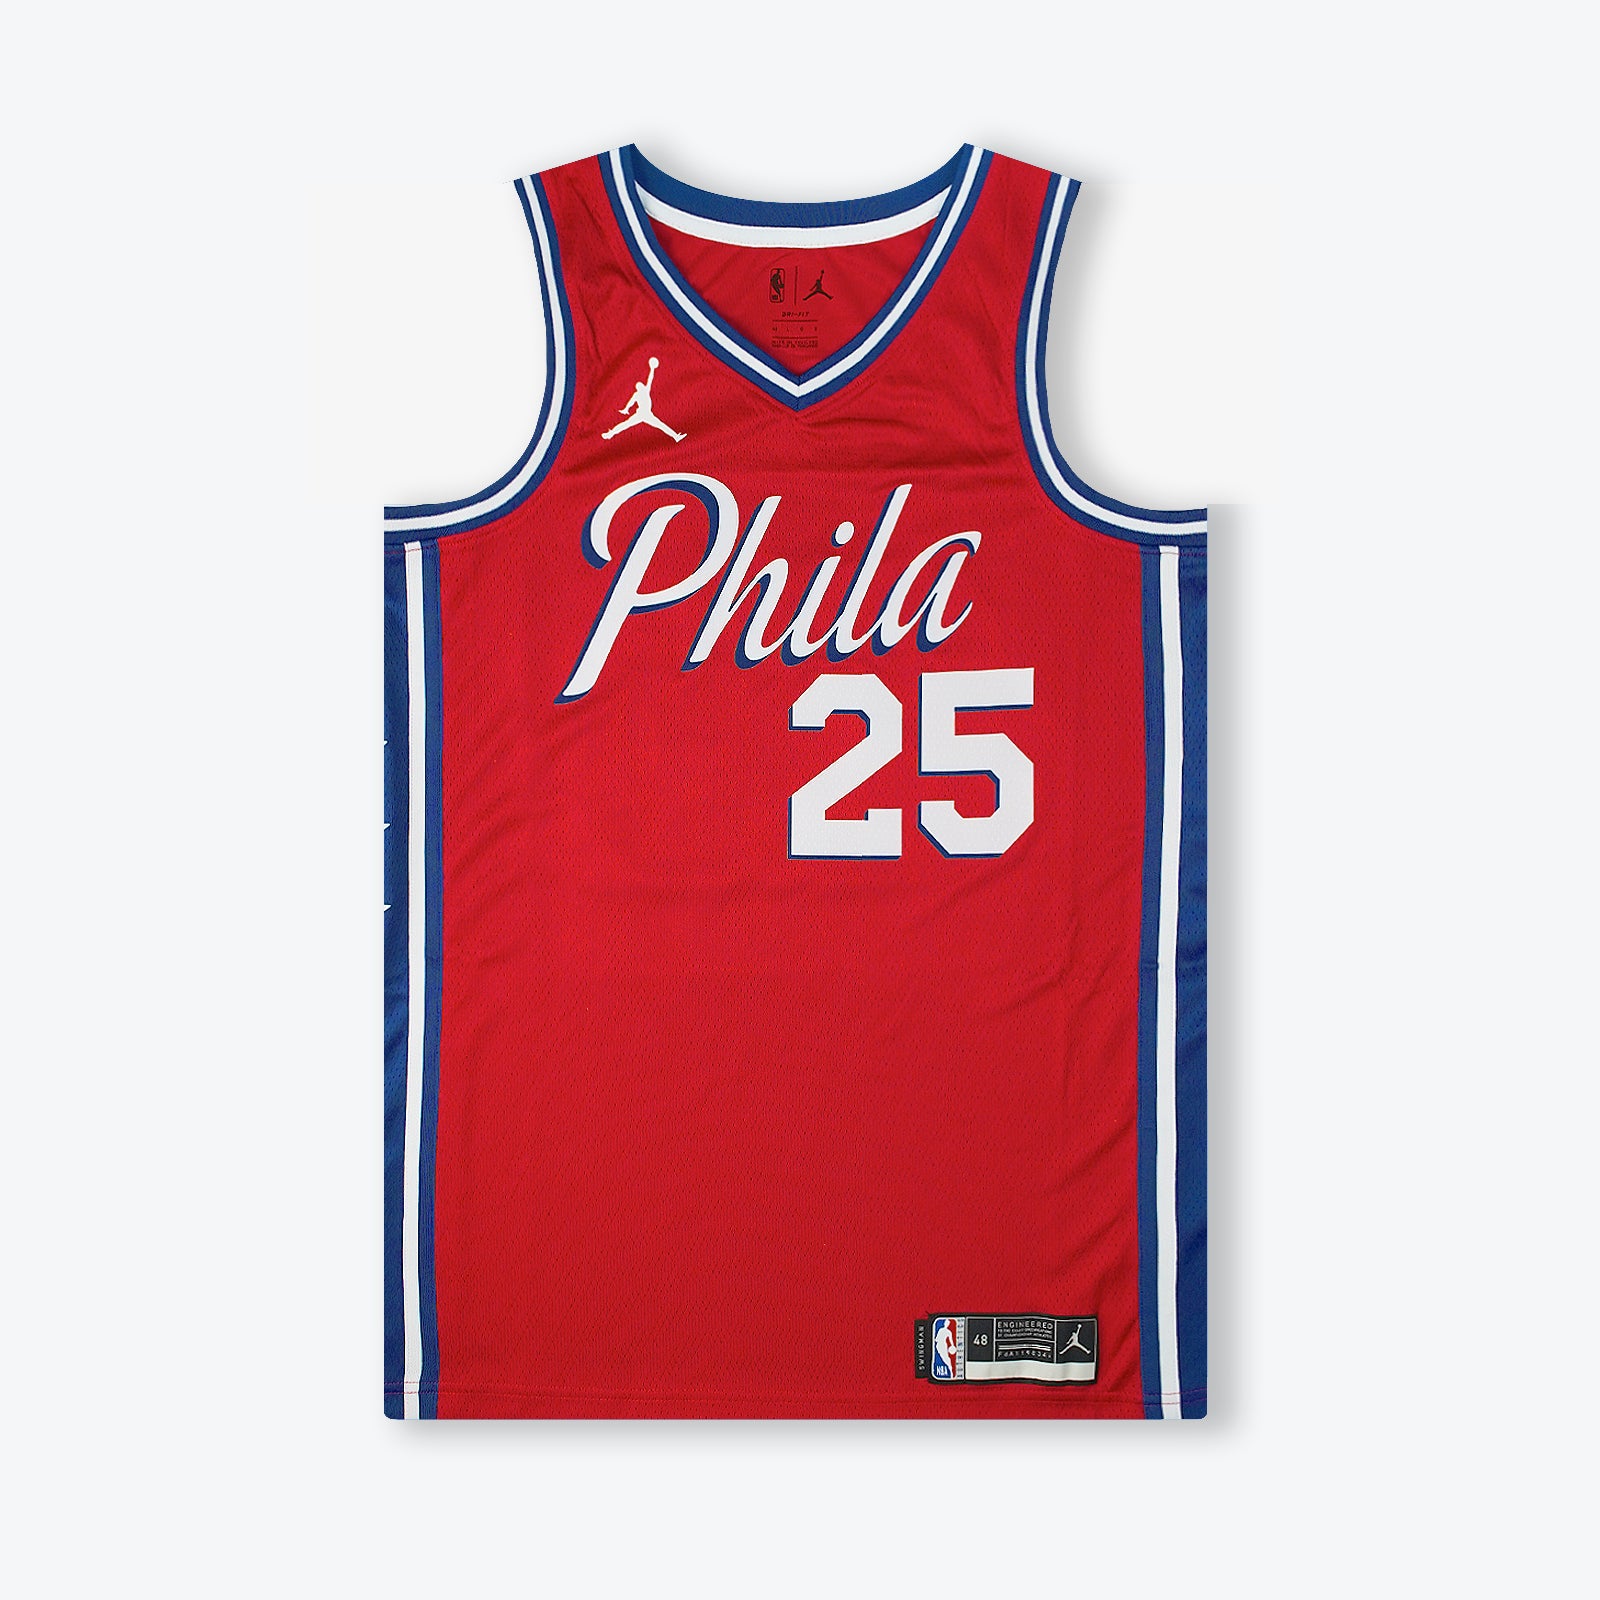 sixers statement jersey